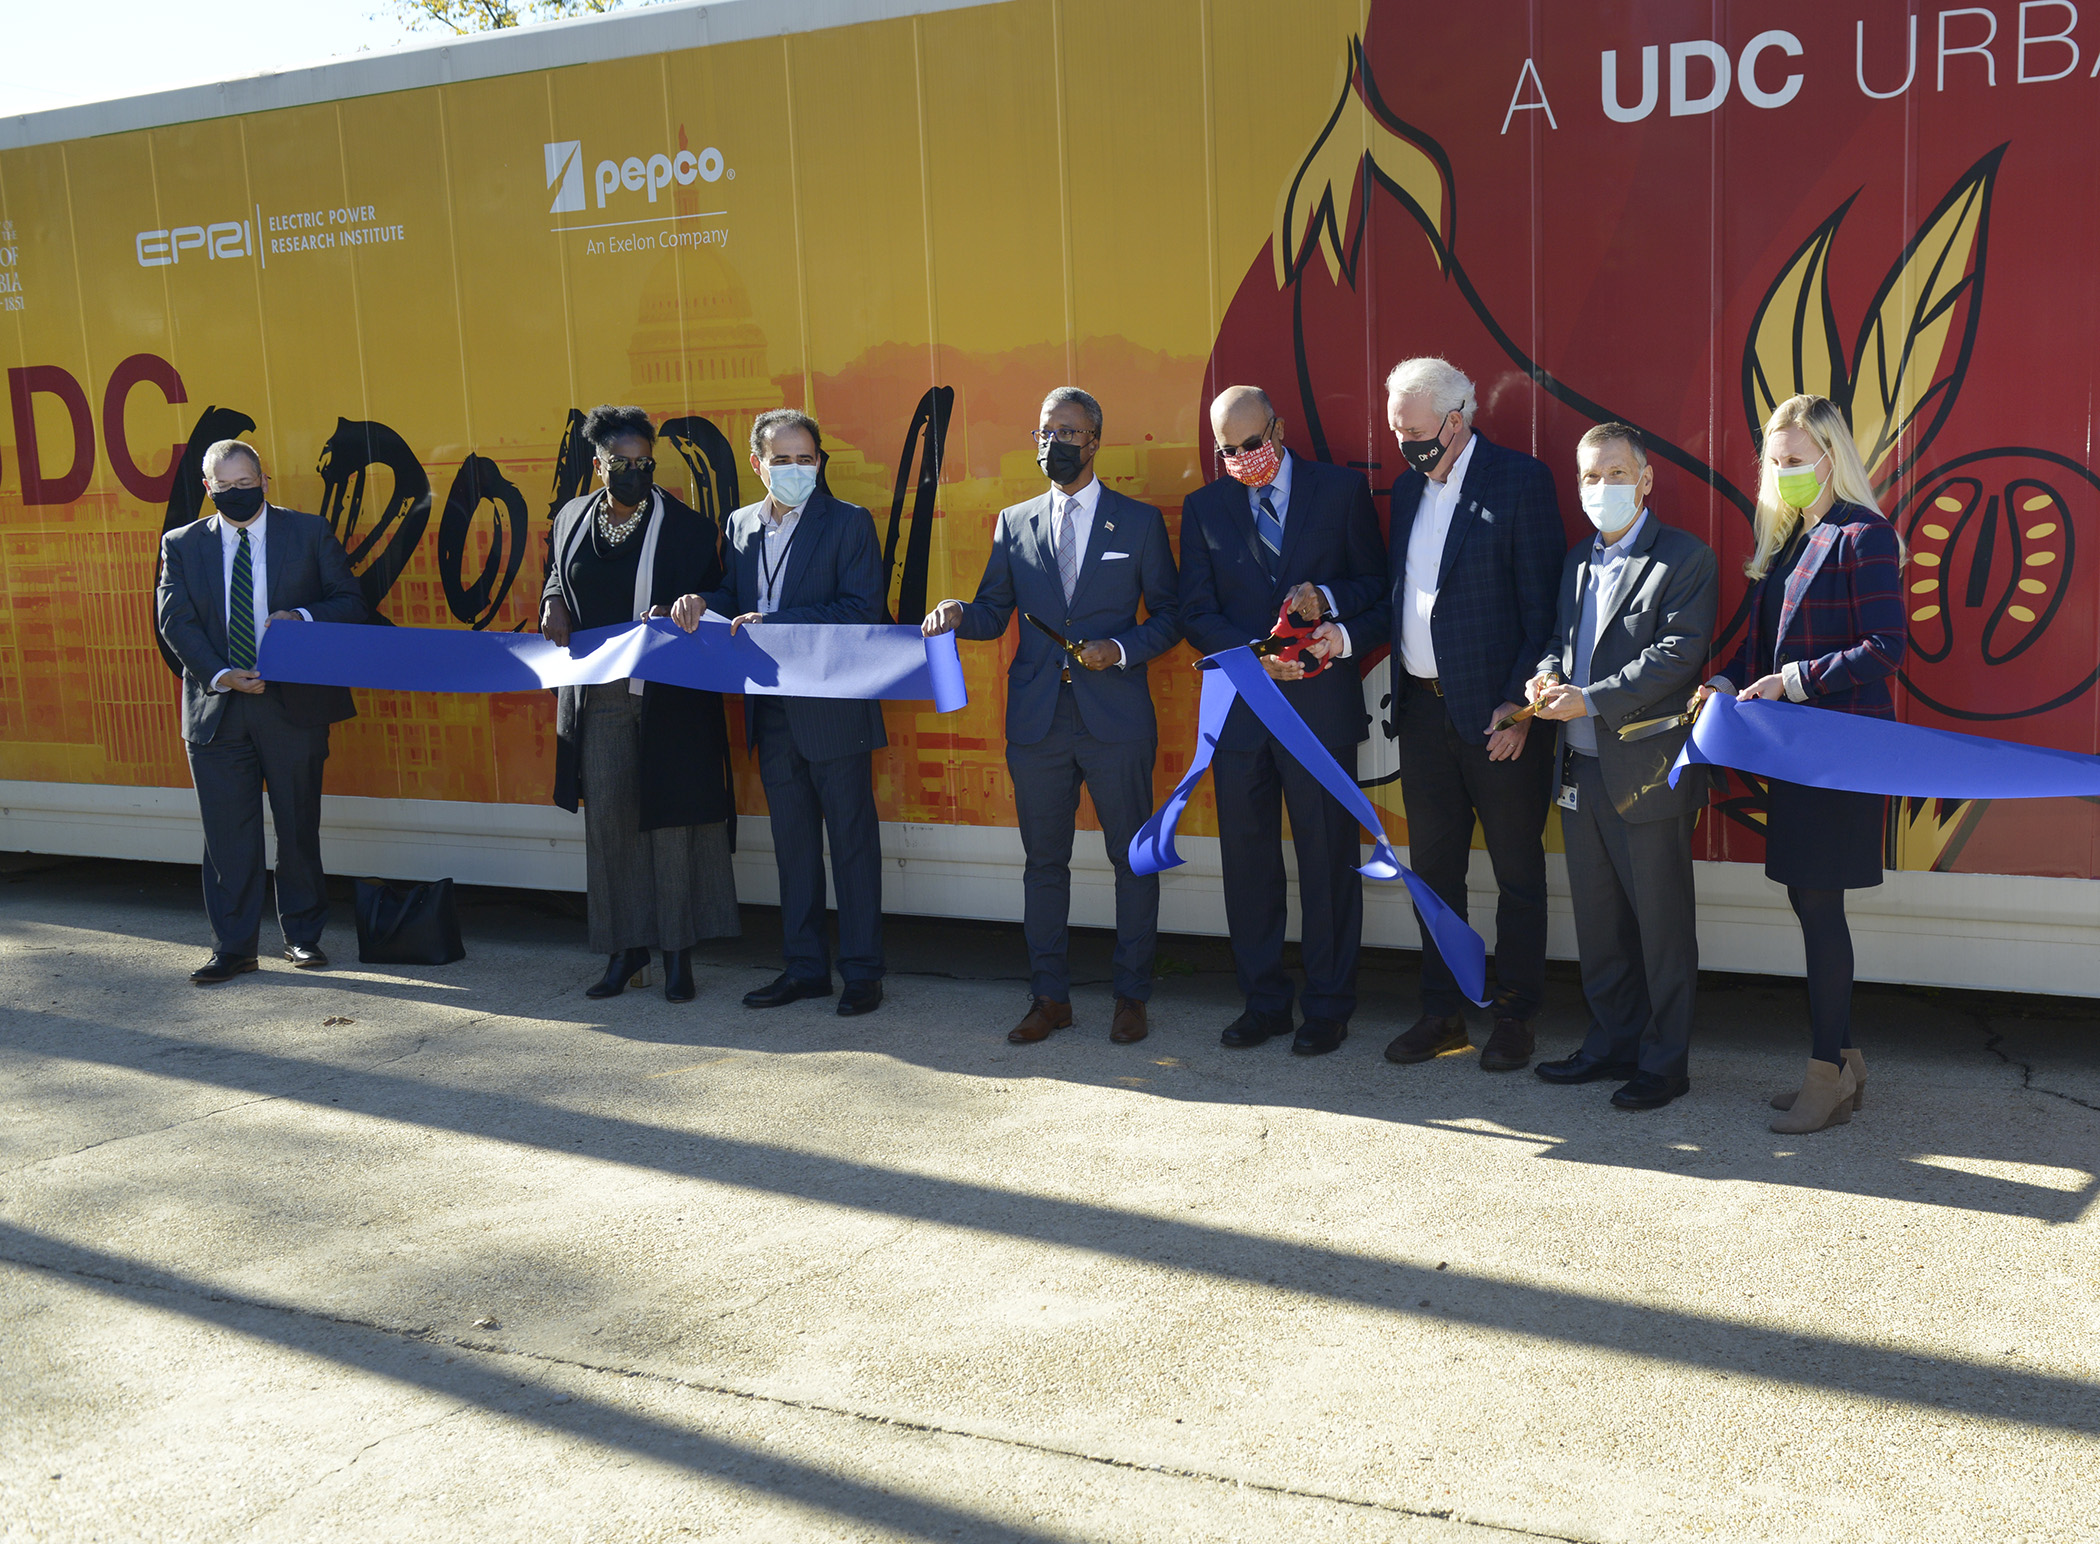 Community Leaders Joined UDC, EPRI and Pepco to Unveil New Innovative Agriculture Pod at UDC’s Bertie Backus Campus